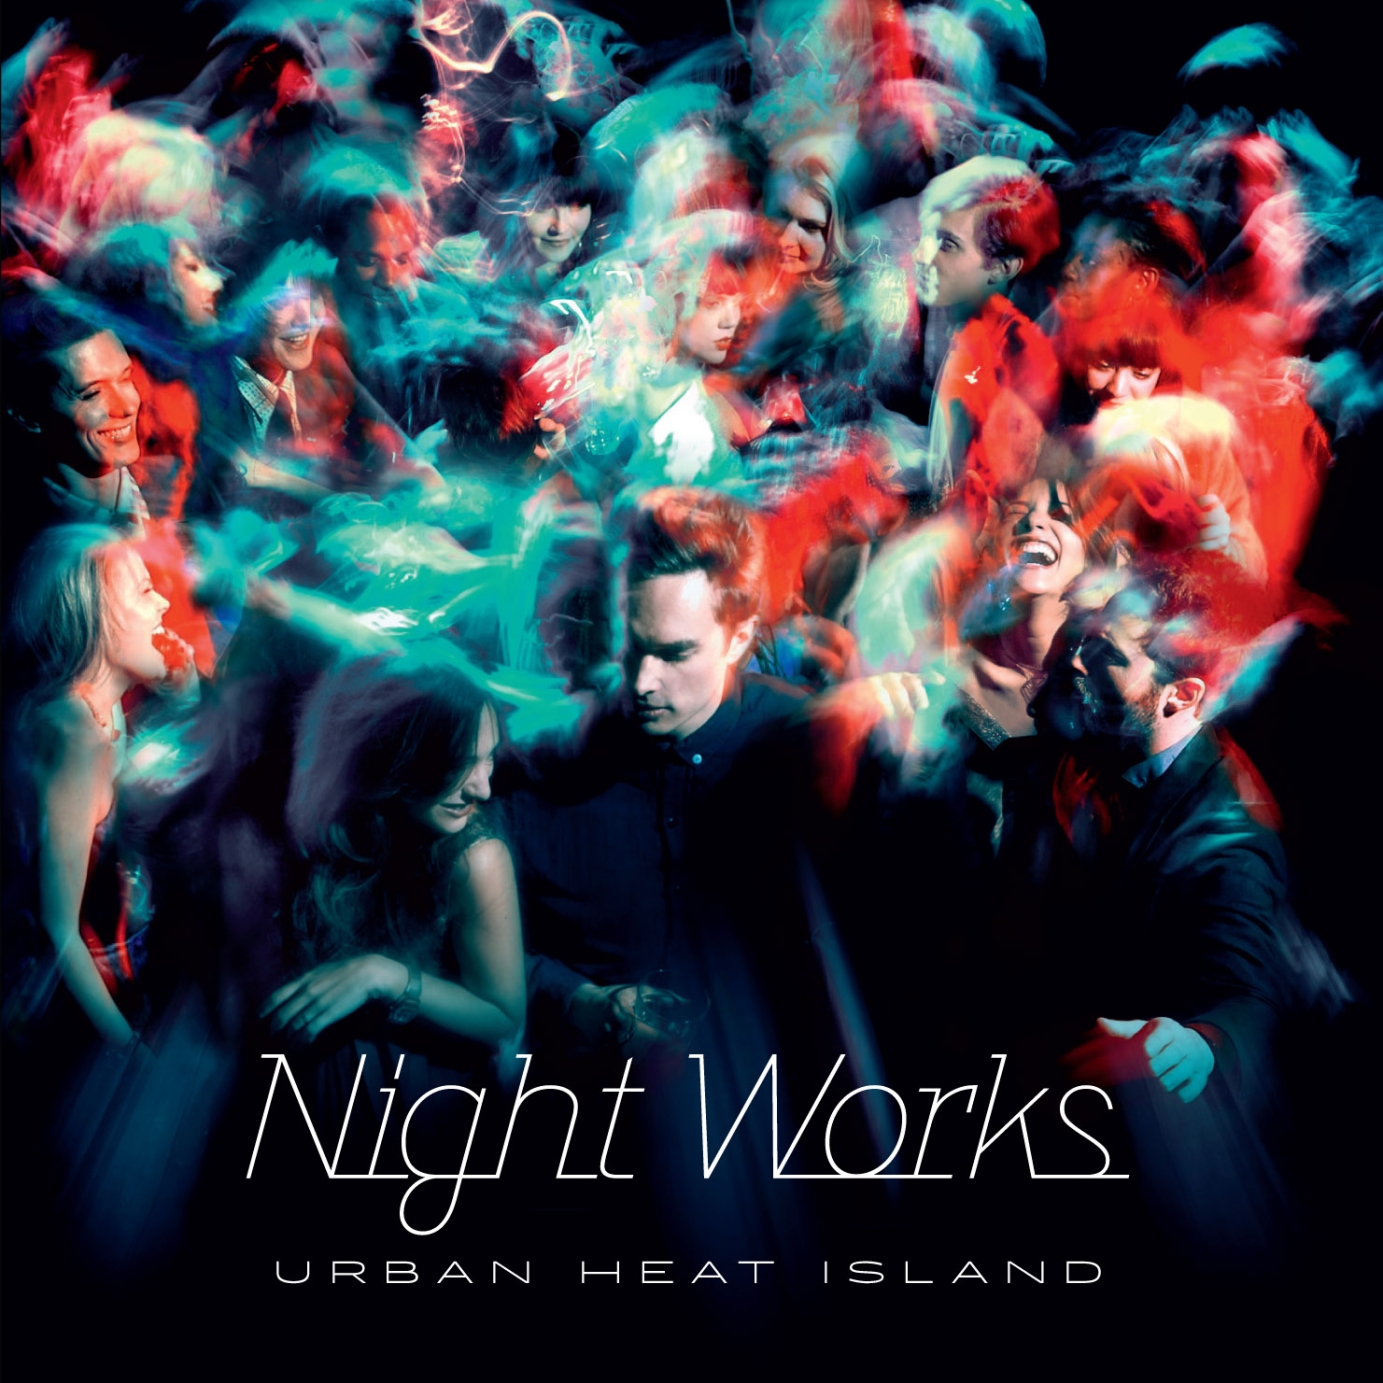 Graphic design for Night Works by robcranedesign